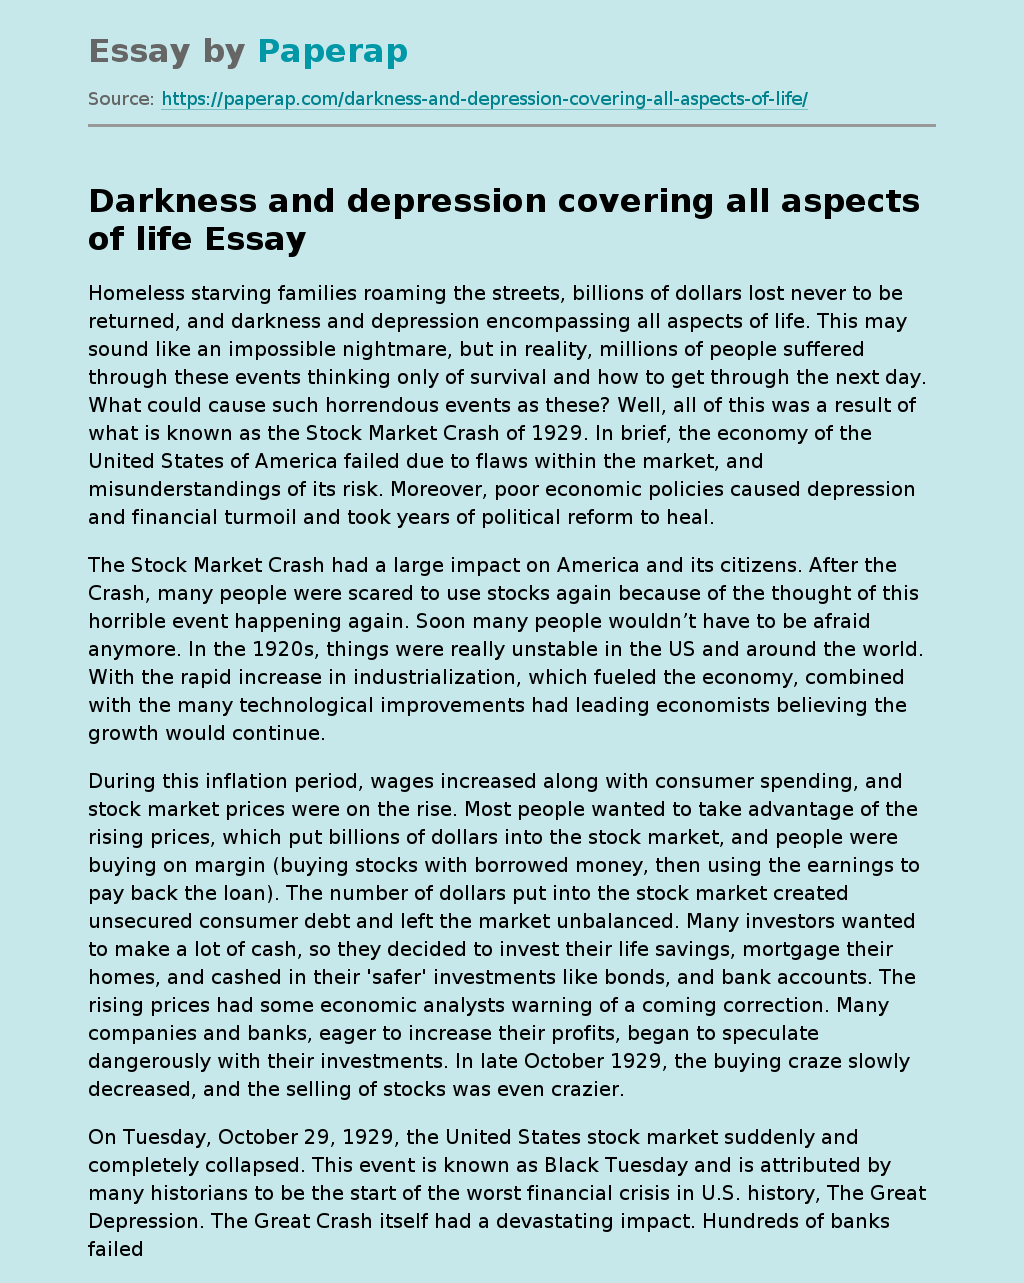 Darkness and depression covering all aspects of life